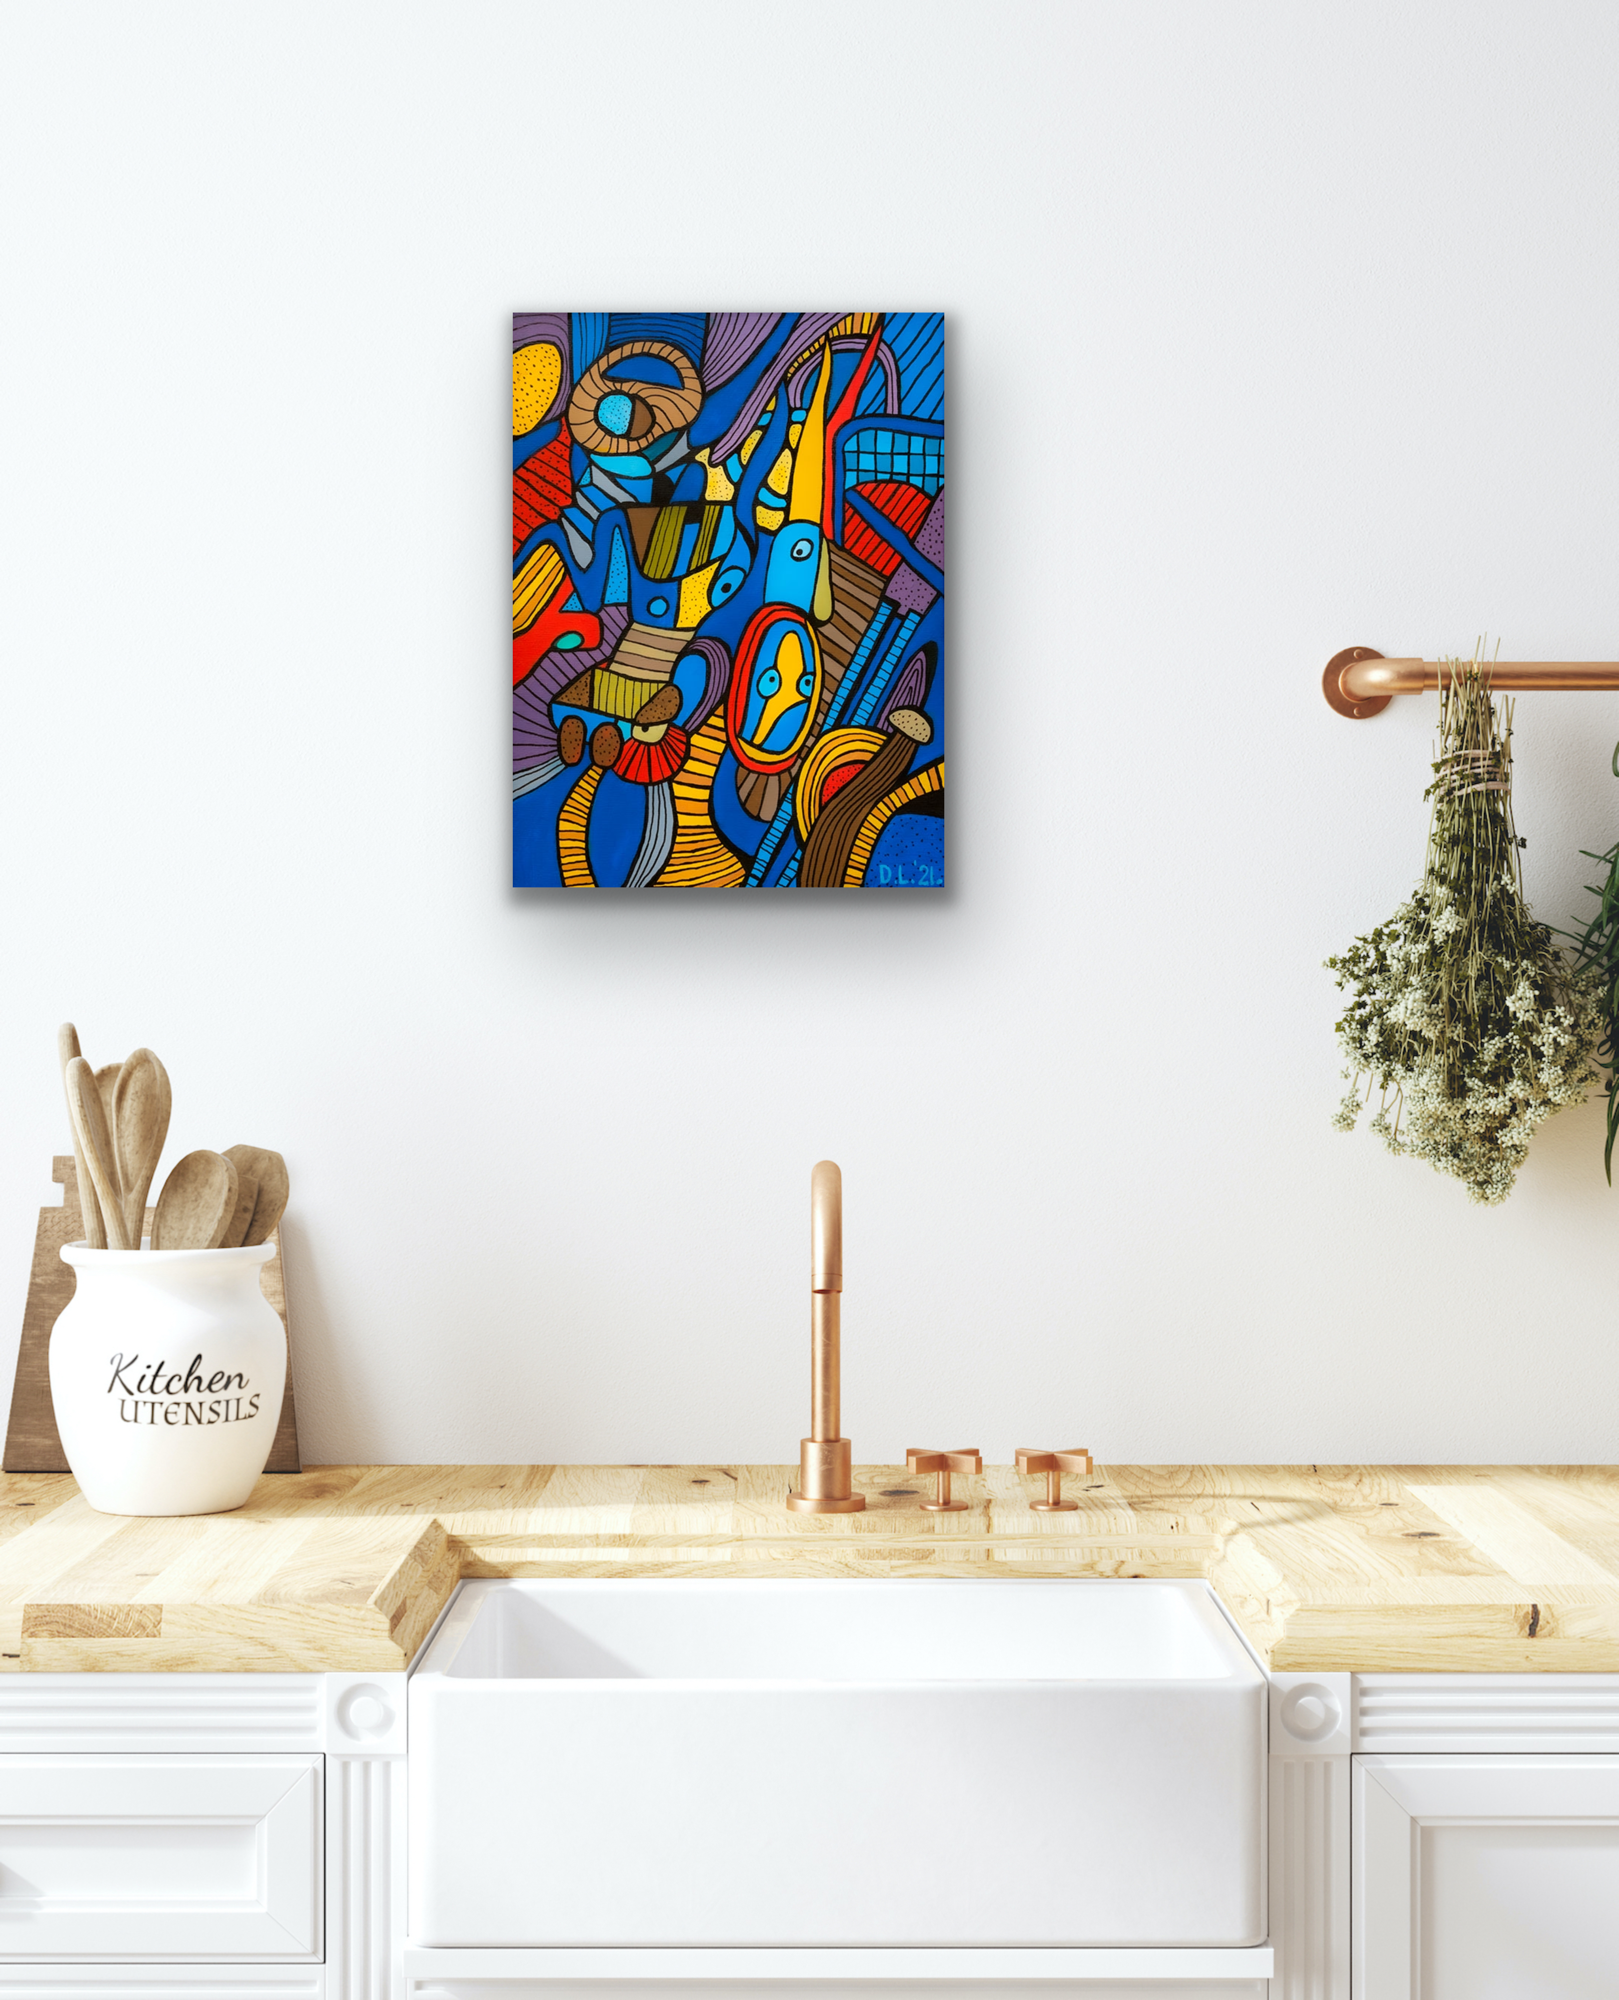 "Rock, Scissor or Stoned" painting will look great in your kitchen, hallway or even your bathroom.